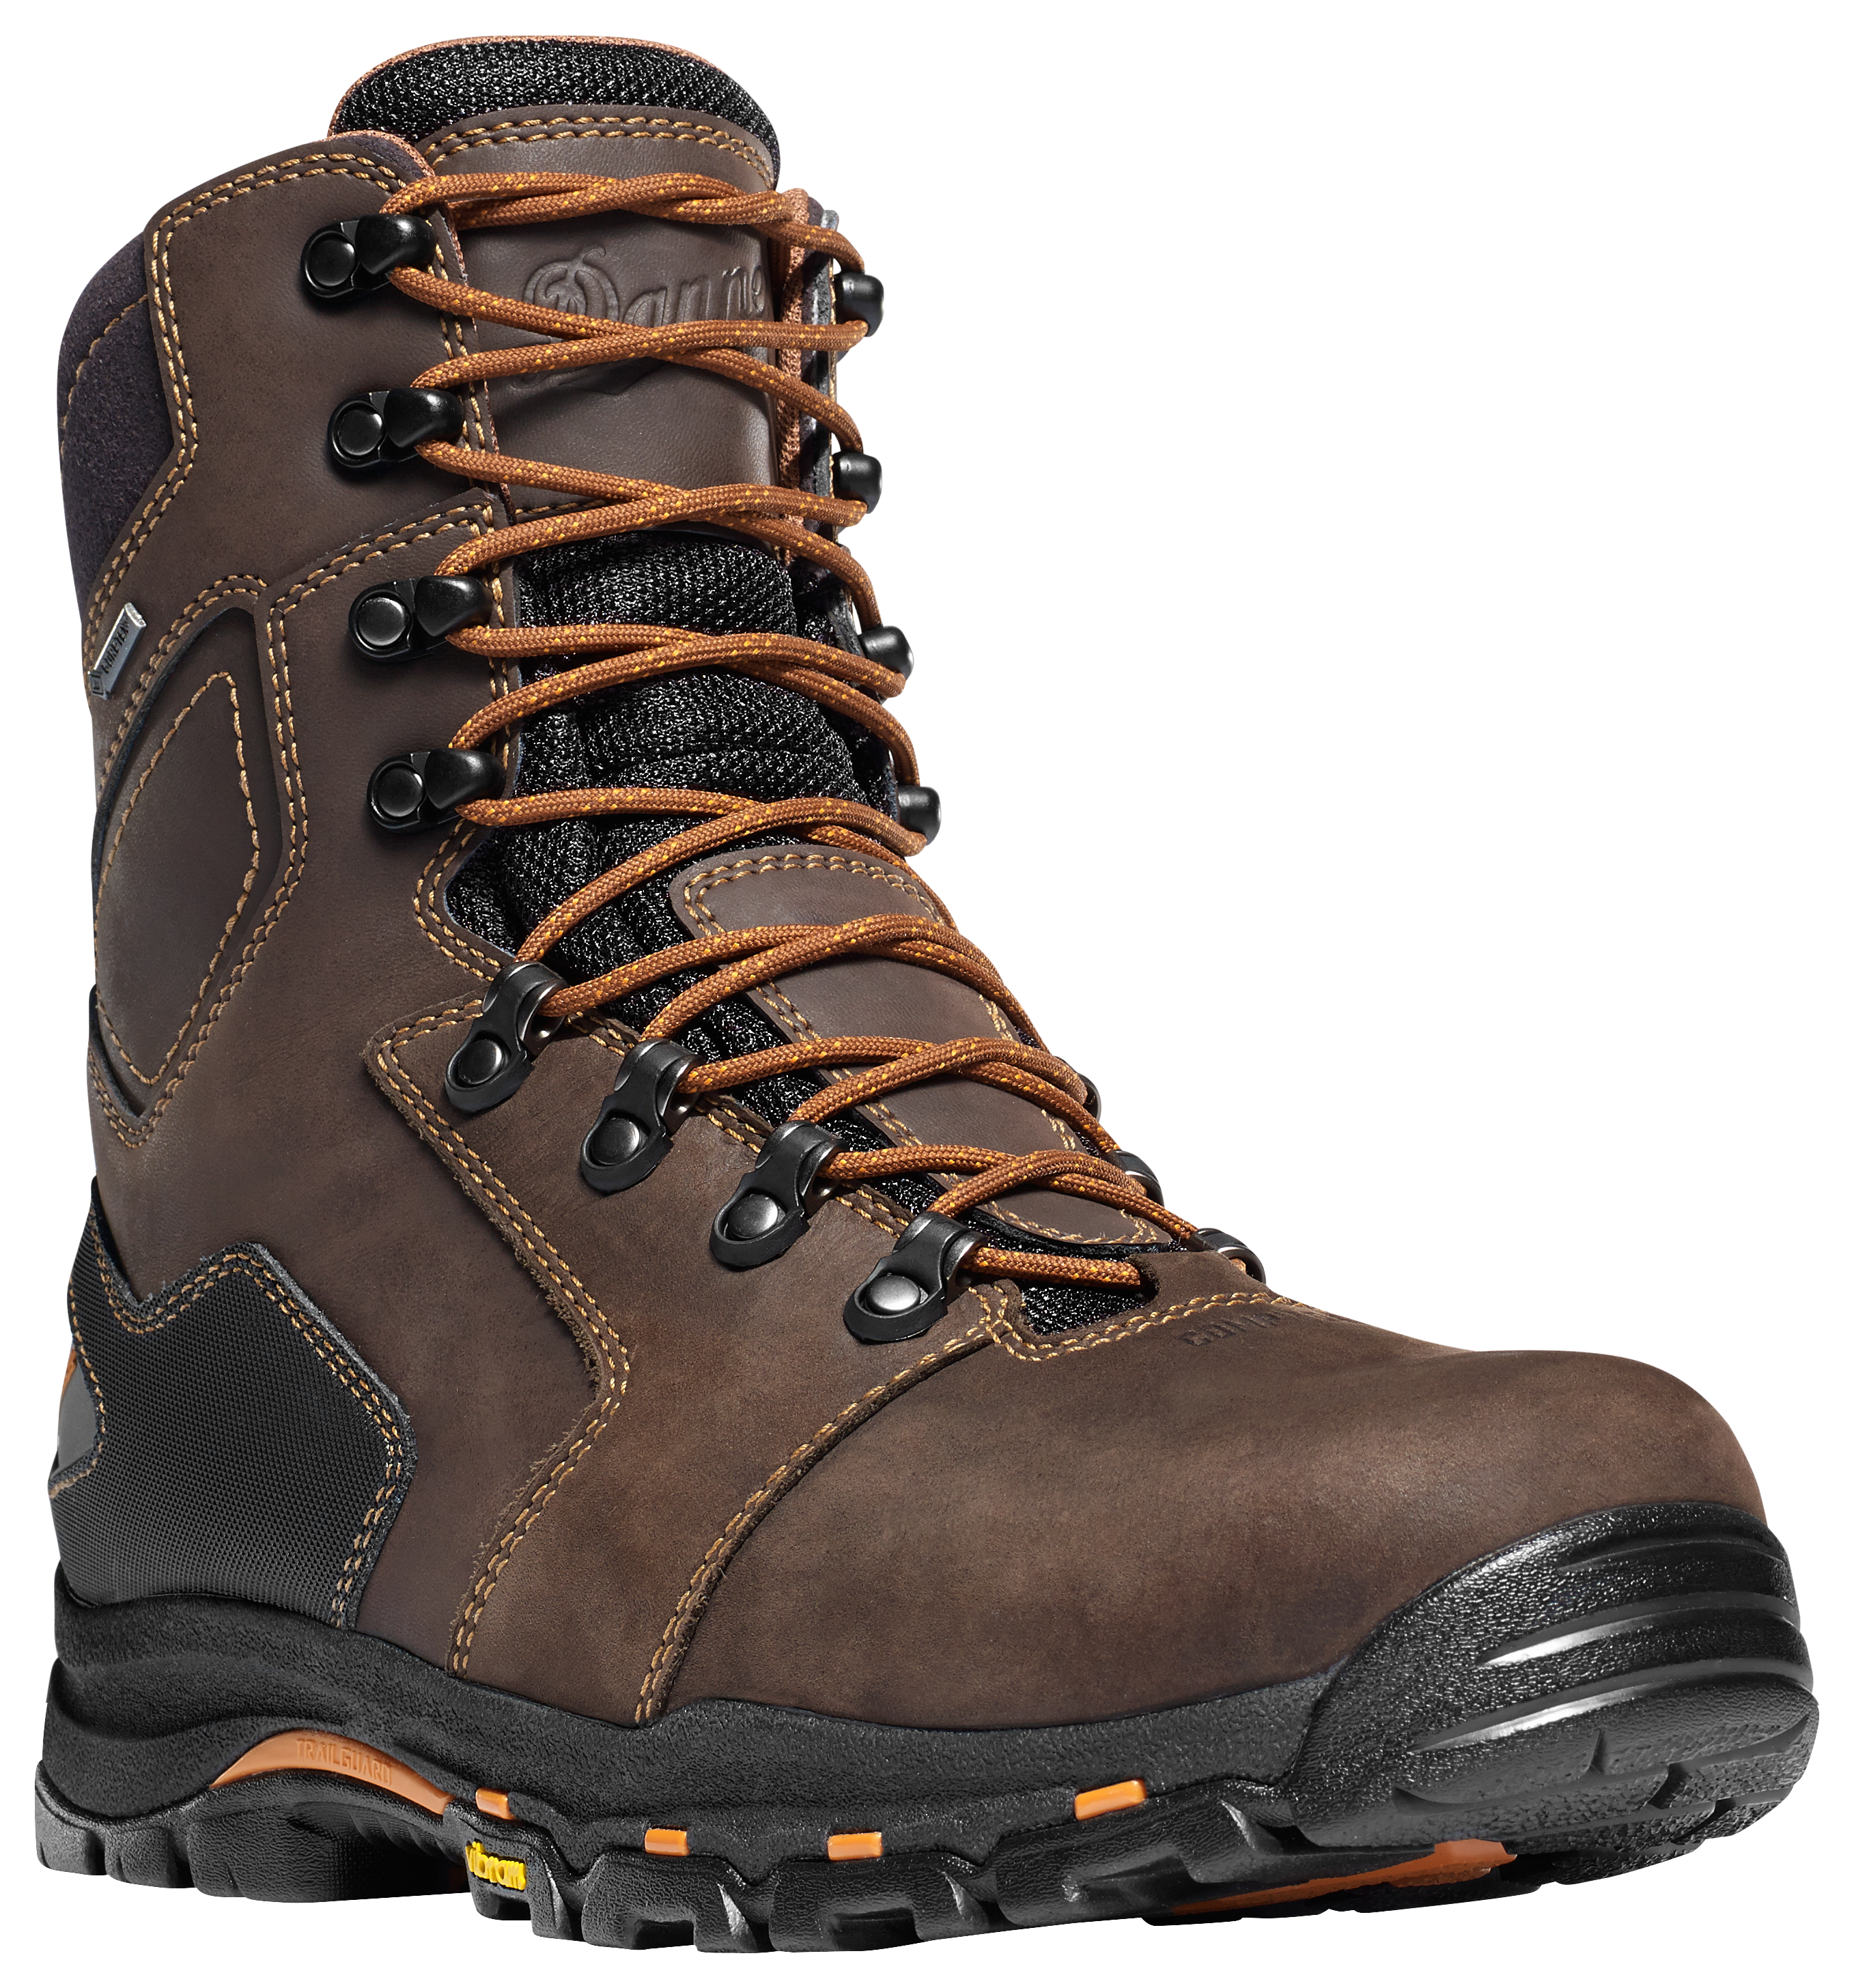 Danner Vicious GORE-TEX Composite Toe Work Boots for Men - Brown - 9W